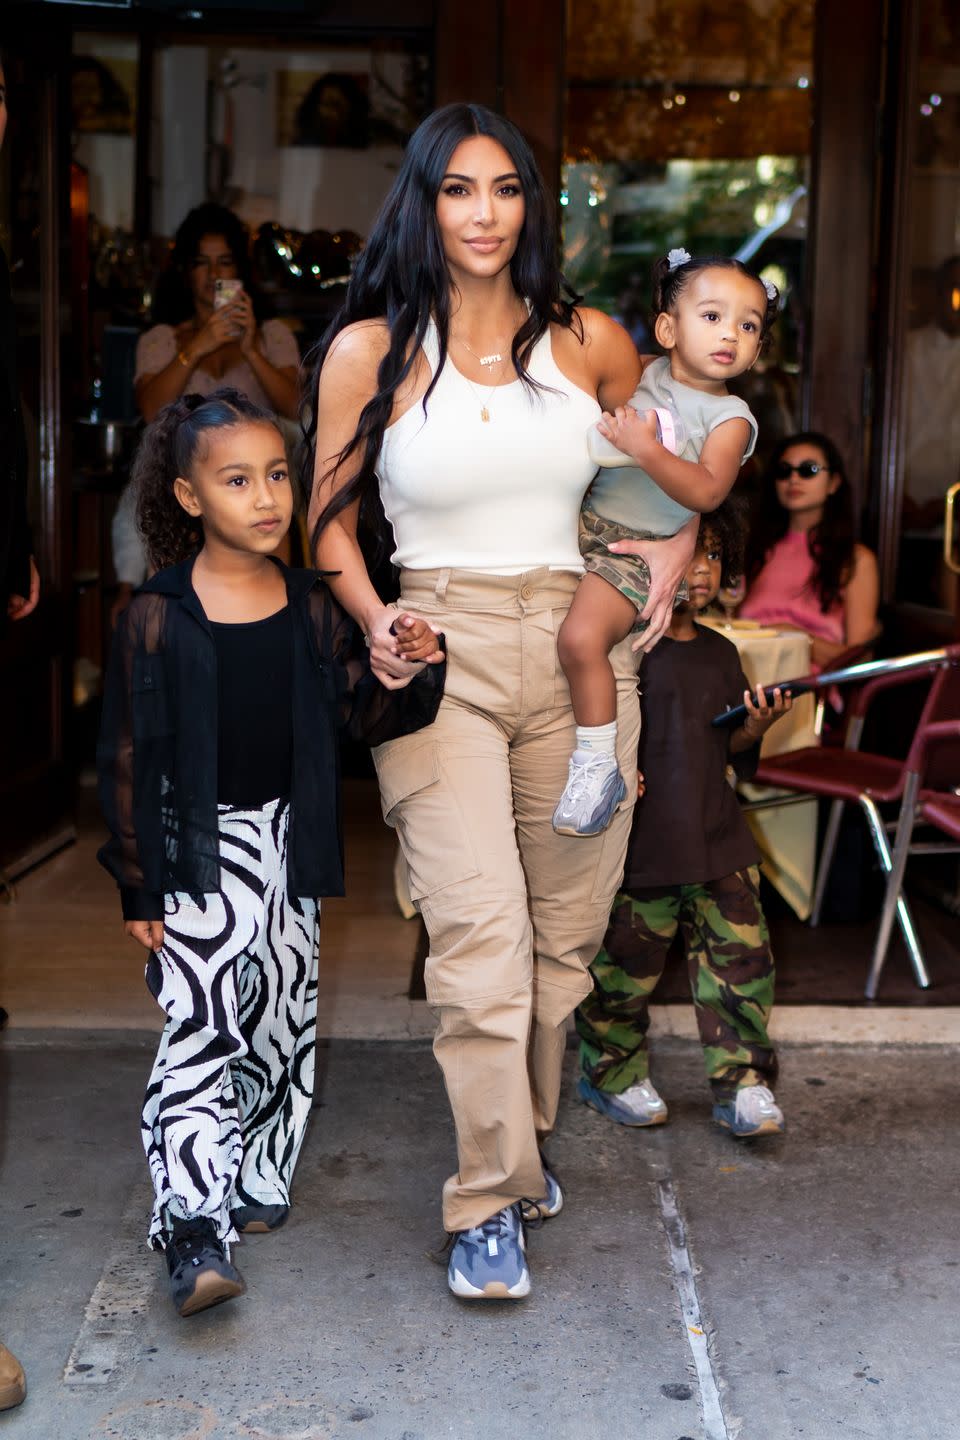 <p>Mother-of-four <a href="https://www.elle.com/uk/life-and-culture/a34697937/kim-kardashian-north-west/" rel="nofollow noopener" target="_blank" data-ylk="slk:Kim Kardashian" class="link rapid-noclick-resp">Kim Kardashian</a>, who shares her children with her ex-husband <a href="https://www.elle.com/uk/life-and-culture/a35569280/kim-kardashian-kanye-west-divorce/" rel="nofollow noopener" target="_blank" data-ylk="slk:Kanye West" class="link rapid-noclick-resp">Kanye West</a>, is known for sharing details about life with her children. </p><p>Eldest daughter North, eight, has been particularly in the spotlight as of late, due to her <a href="https://www.elle.com/uk/life-and-culture/culture/a38524283/kim-kardashian-north-safety-mason-disick/" rel="nofollow noopener" target="_blank" data-ylk="slk:TikTok footage" class="link rapid-noclick-resp">TikTok footage</a>. </p><p>One of the sweetest things the <a href="https://www.elle.com/uk/fashion/a34781235/skims-uk-kim-kardashian/" rel="nofollow noopener" target="_blank" data-ylk="slk:SKIMS" class="link rapid-noclick-resp">SKIMS </a>founder has said was during an episode of E! True Hollywood Story in 2019.</p><p>'I just love being a mum. It’s exhausting, it’s gruelling, but it’s the best,' she said, per<a href="https://www.usmagazine.com/celebrity-moms/pictures/kim-kardashians-greatest-quotes-about-motherhood/worth-it/" rel="nofollow noopener" target="_blank" data-ylk="slk:US Magazine" class="link rapid-noclick-resp"> US Magazine</a>. </p><p>The 41-year-old, who had her last two children Chicago and Psalm, via a surrogate, said on <a href="https://www.youtube.com/watch?v=R7LwZFTjrzA" rel="nofollow noopener" target="_blank" data-ylk="slk:The Tonight Show" class="link rapid-noclick-resp">The Tonight Show</a> with Jimmy Fallon in 2019 ahead of the birth of her fourth child: 'I was kind of stressing that my house is so full, but I heard that parents of four are the most enlightened and calm of all parents.'</p><p>Recently, during a conversation with journalist Bari Weiss, the <a href="https://www.elle.com/uk/life-and-culture/culture/a33963626/keeping-up-with-the-kardashians-red-flags-end/" rel="nofollow noopener" target="_blank" data-ylk="slk:Keeping Up With The Kardashians" class="link rapid-noclick-resp">Keeping Up With The Kardashians </a>star said that daughter North intimidates her more than politicians. </p>